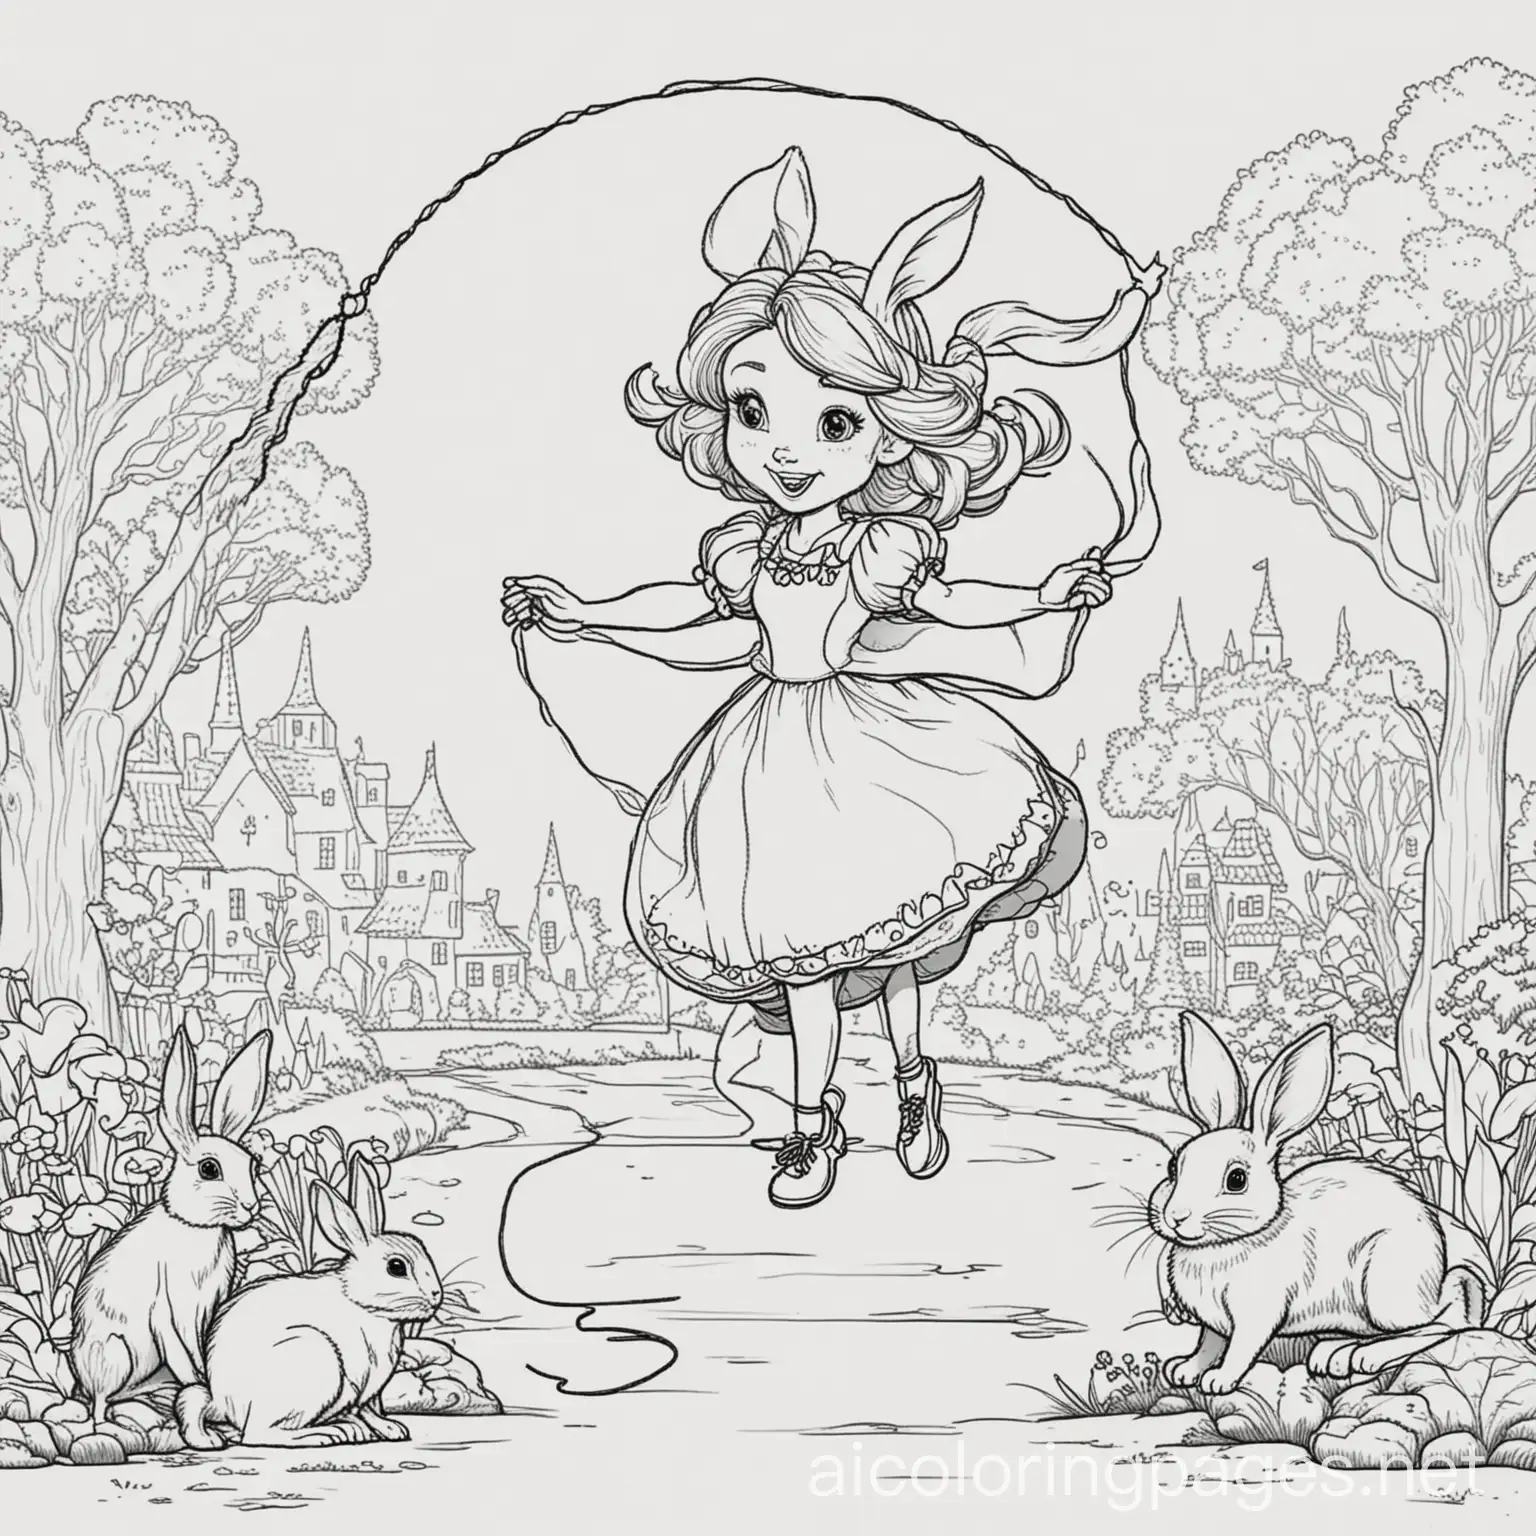 Cartoonish Cindrella jumping rope along with the rabbits and mouses, Coloring Page, black and white, line art, white background, Simplicity, Ample White Space. The background of the coloring page is plain white to make it easy for young children to color within the lines. The outlines of all the subjects are easy to distinguish, making it simple for kids to color without too much difficulty